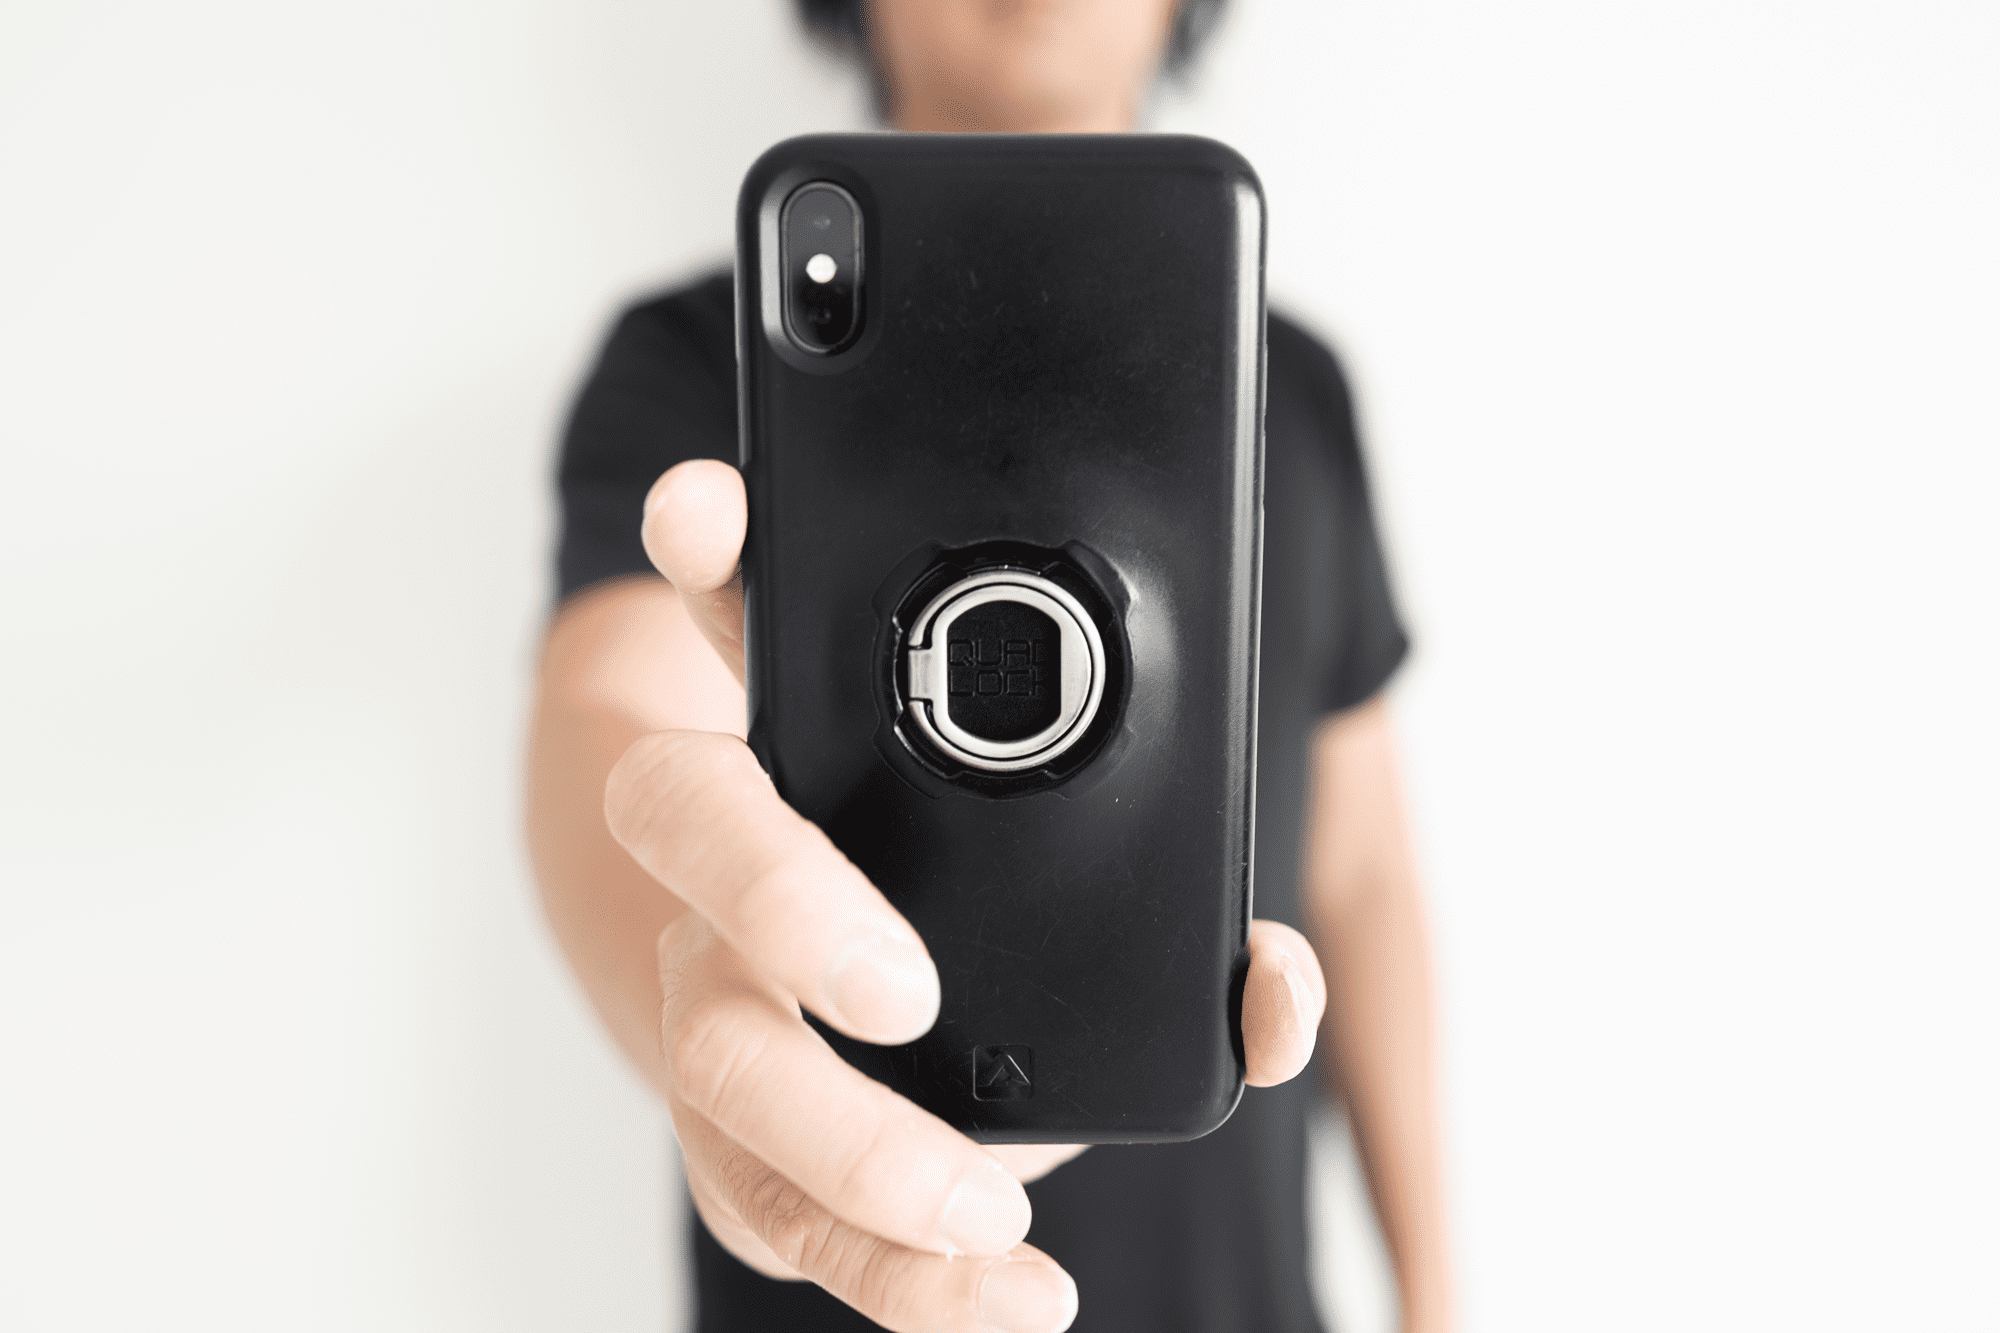 Quad Lock Smartphone Case And Mounting System Review